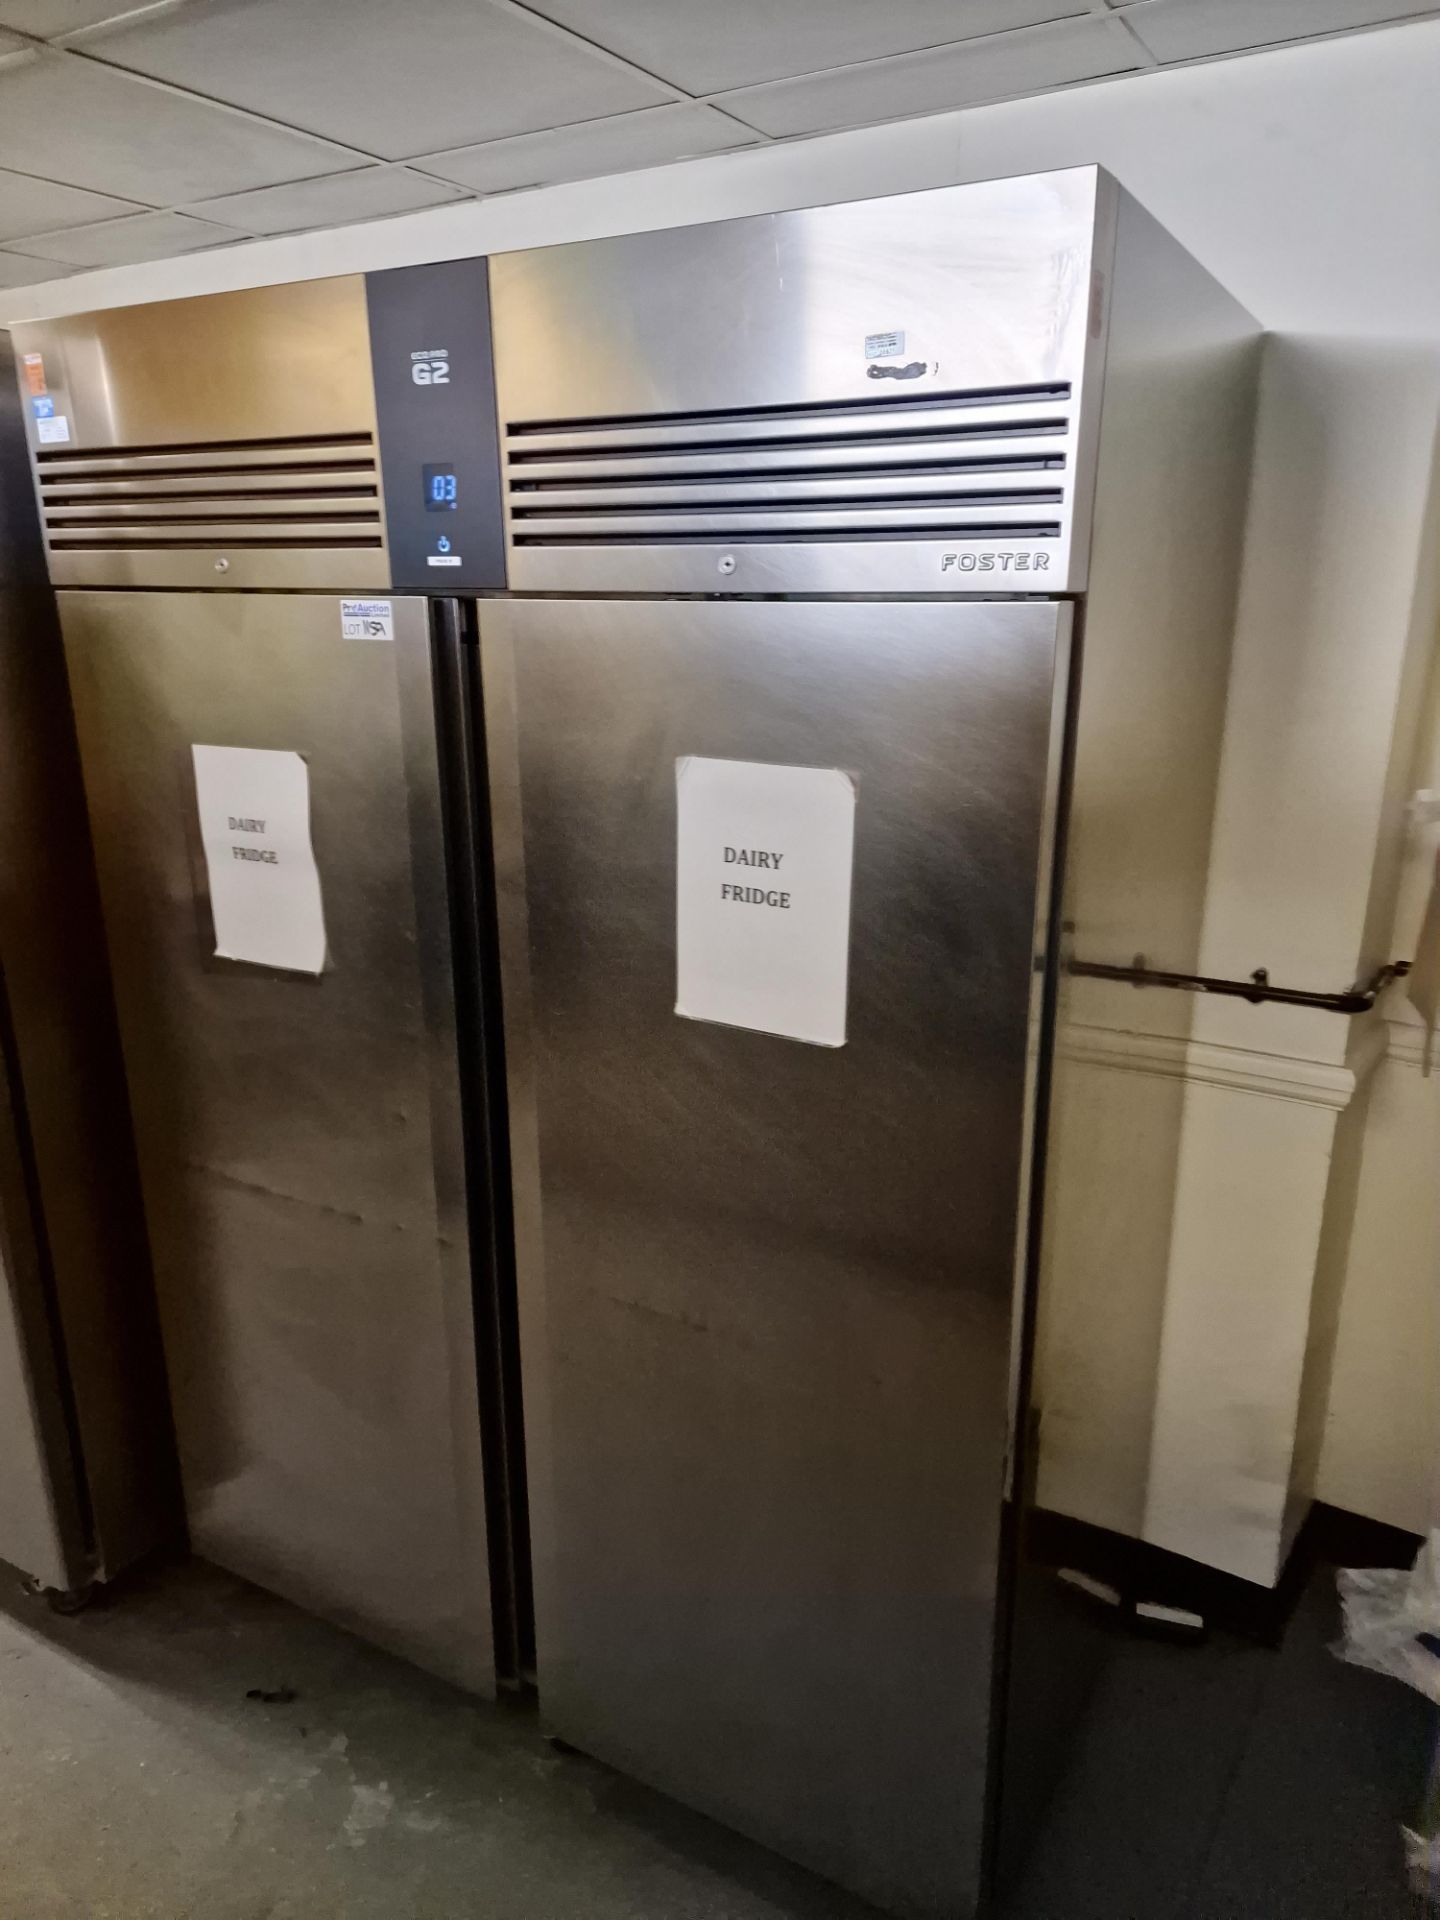 Foster Refrigeration EP1440H Pro G2 Stainless Steel Heavy Duty Vertical Double Door Refrigerator - Image 2 of 4